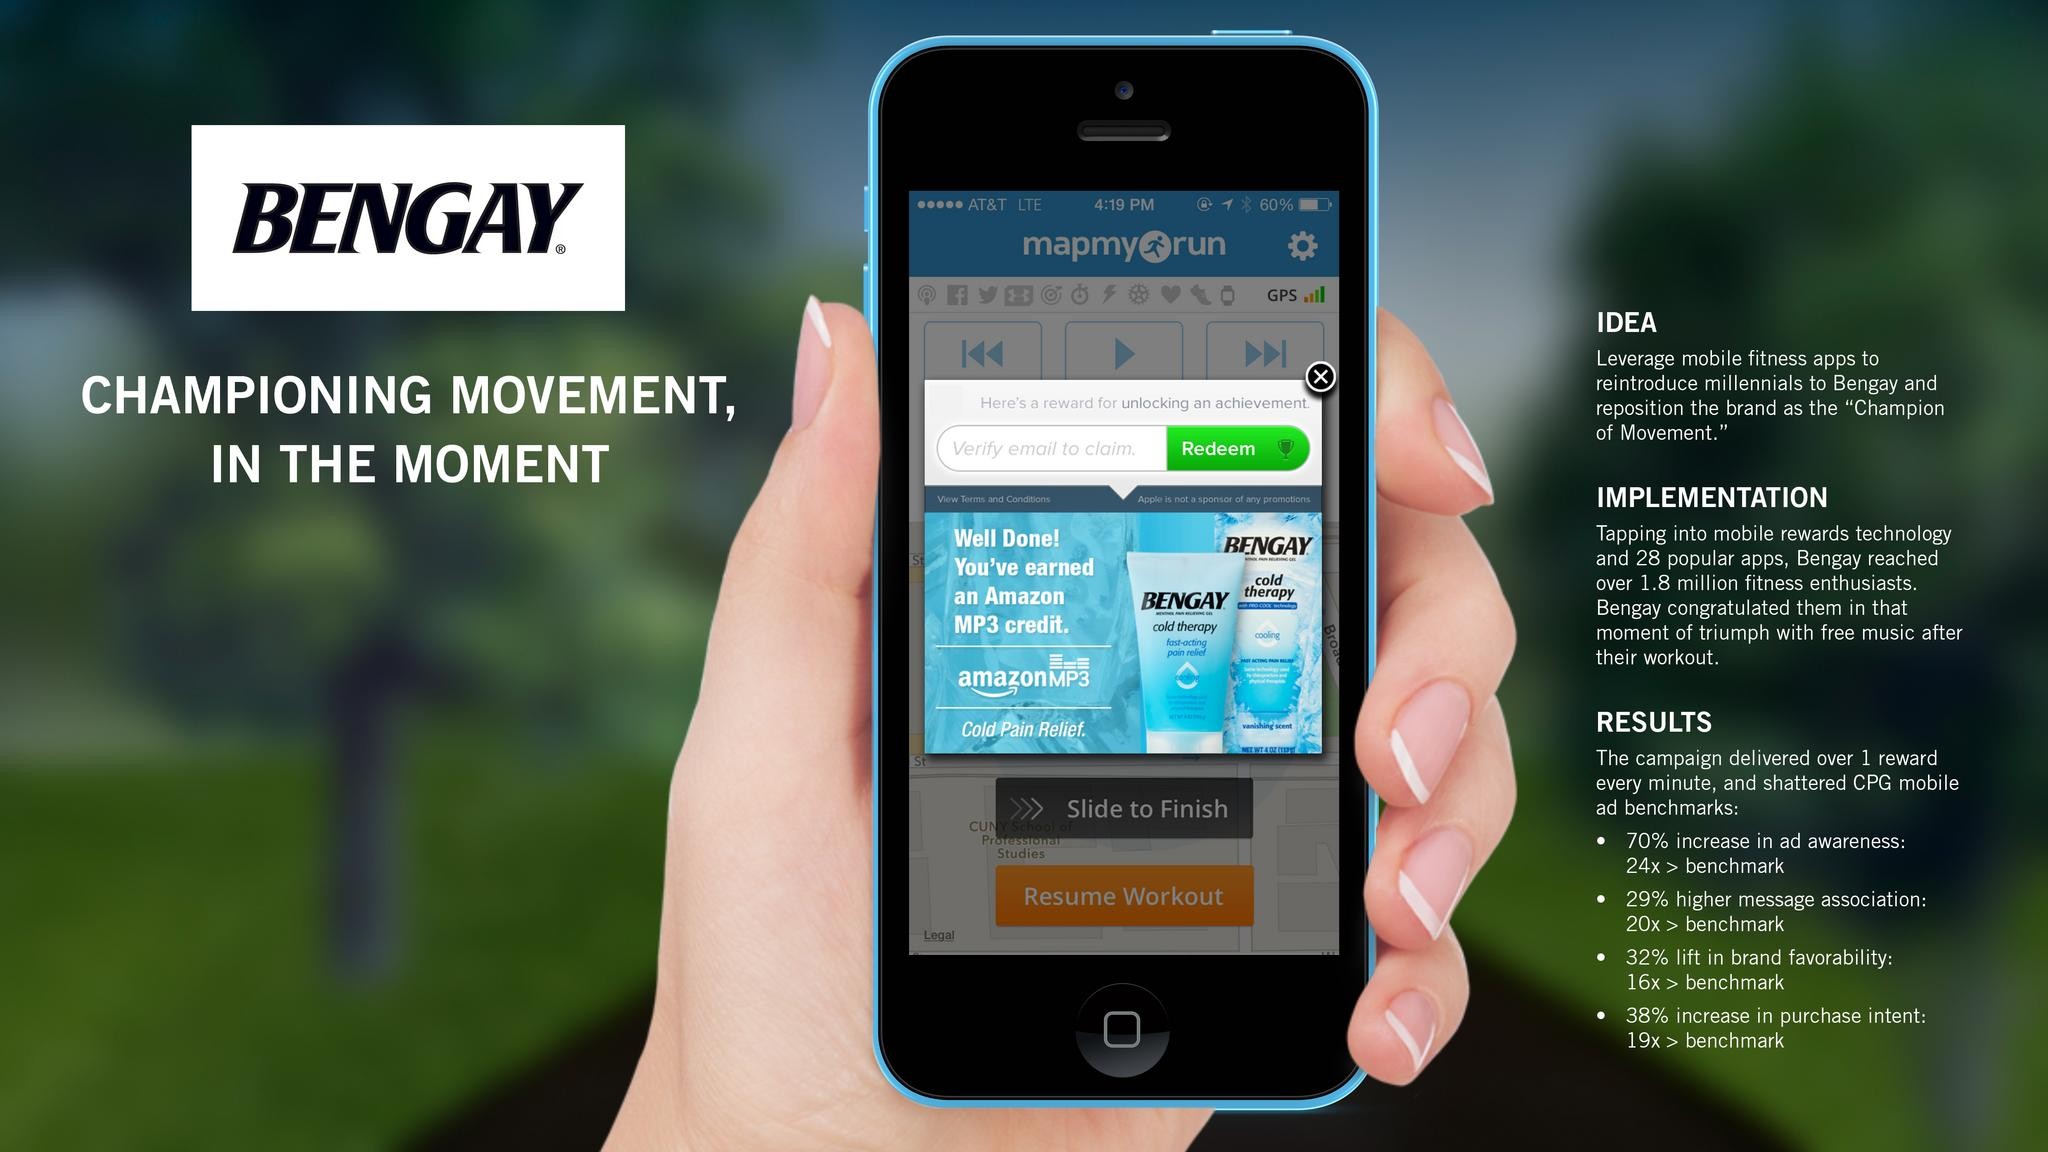 BENGAY - CHAMPIONING MOVEMENT, IN THE MOMENT